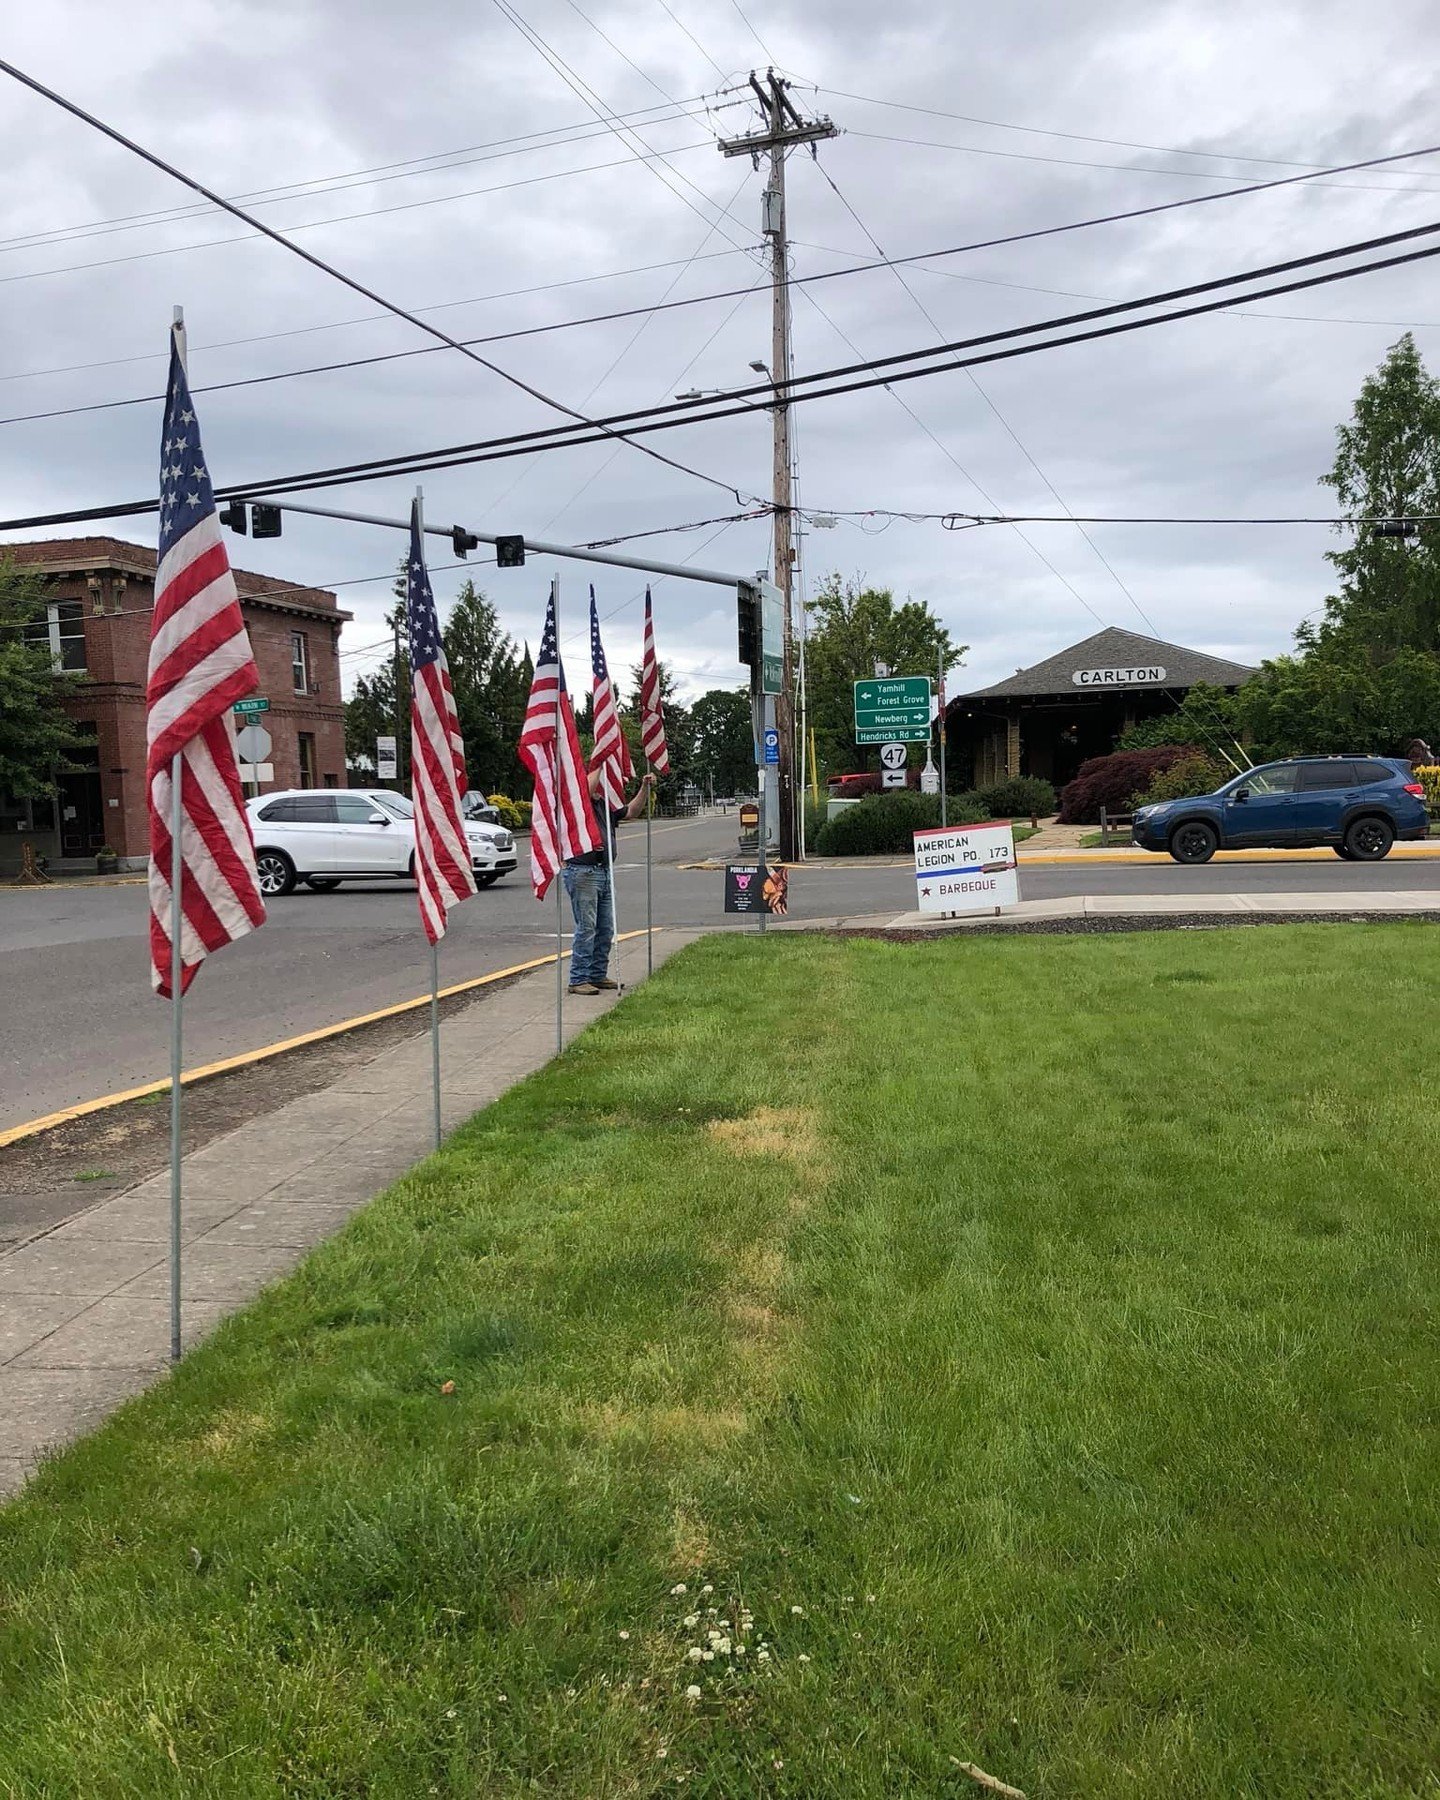 Flags are flying around town, and many events are happening all weekend! Hit the town to support our local businesses and remember our fallen heroes this Memorial Day. ❤️ #carltonoregon #carltonbusinessassociation #memorialday
photo: @americanlegionp